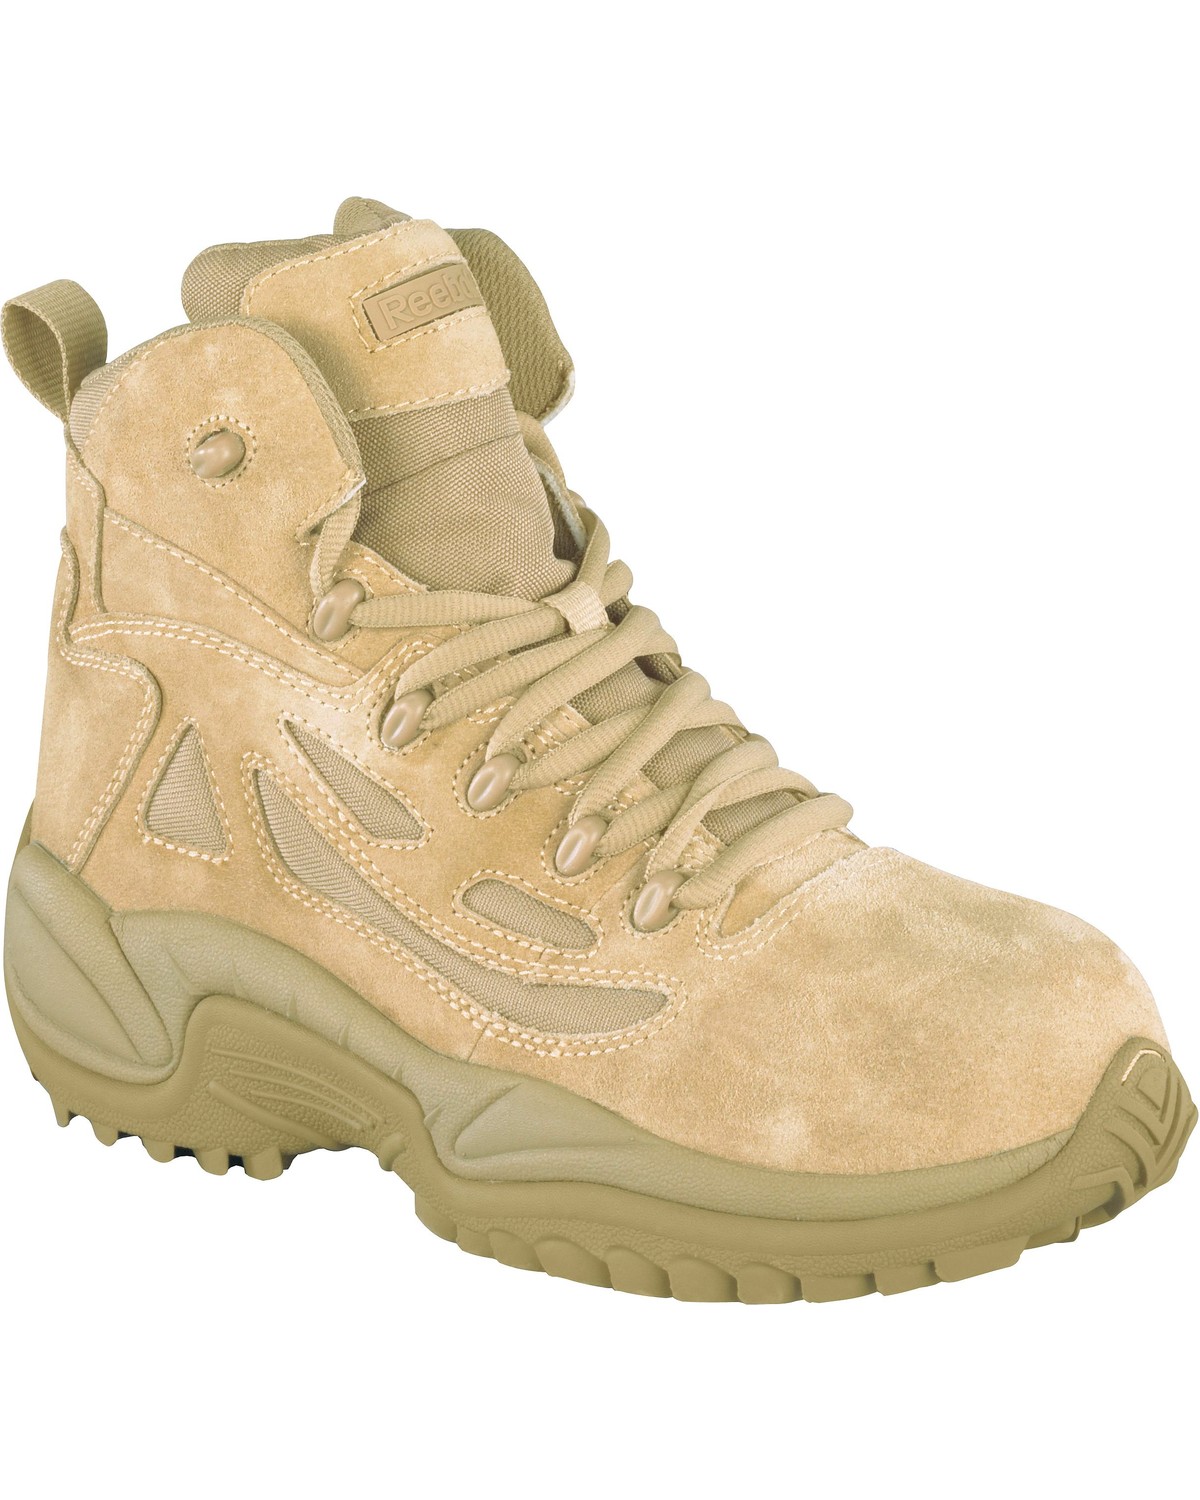 Reebok Men's Stealth 6" Lace-Up with Side-Zip Tactical Work Boots - Composite Toe